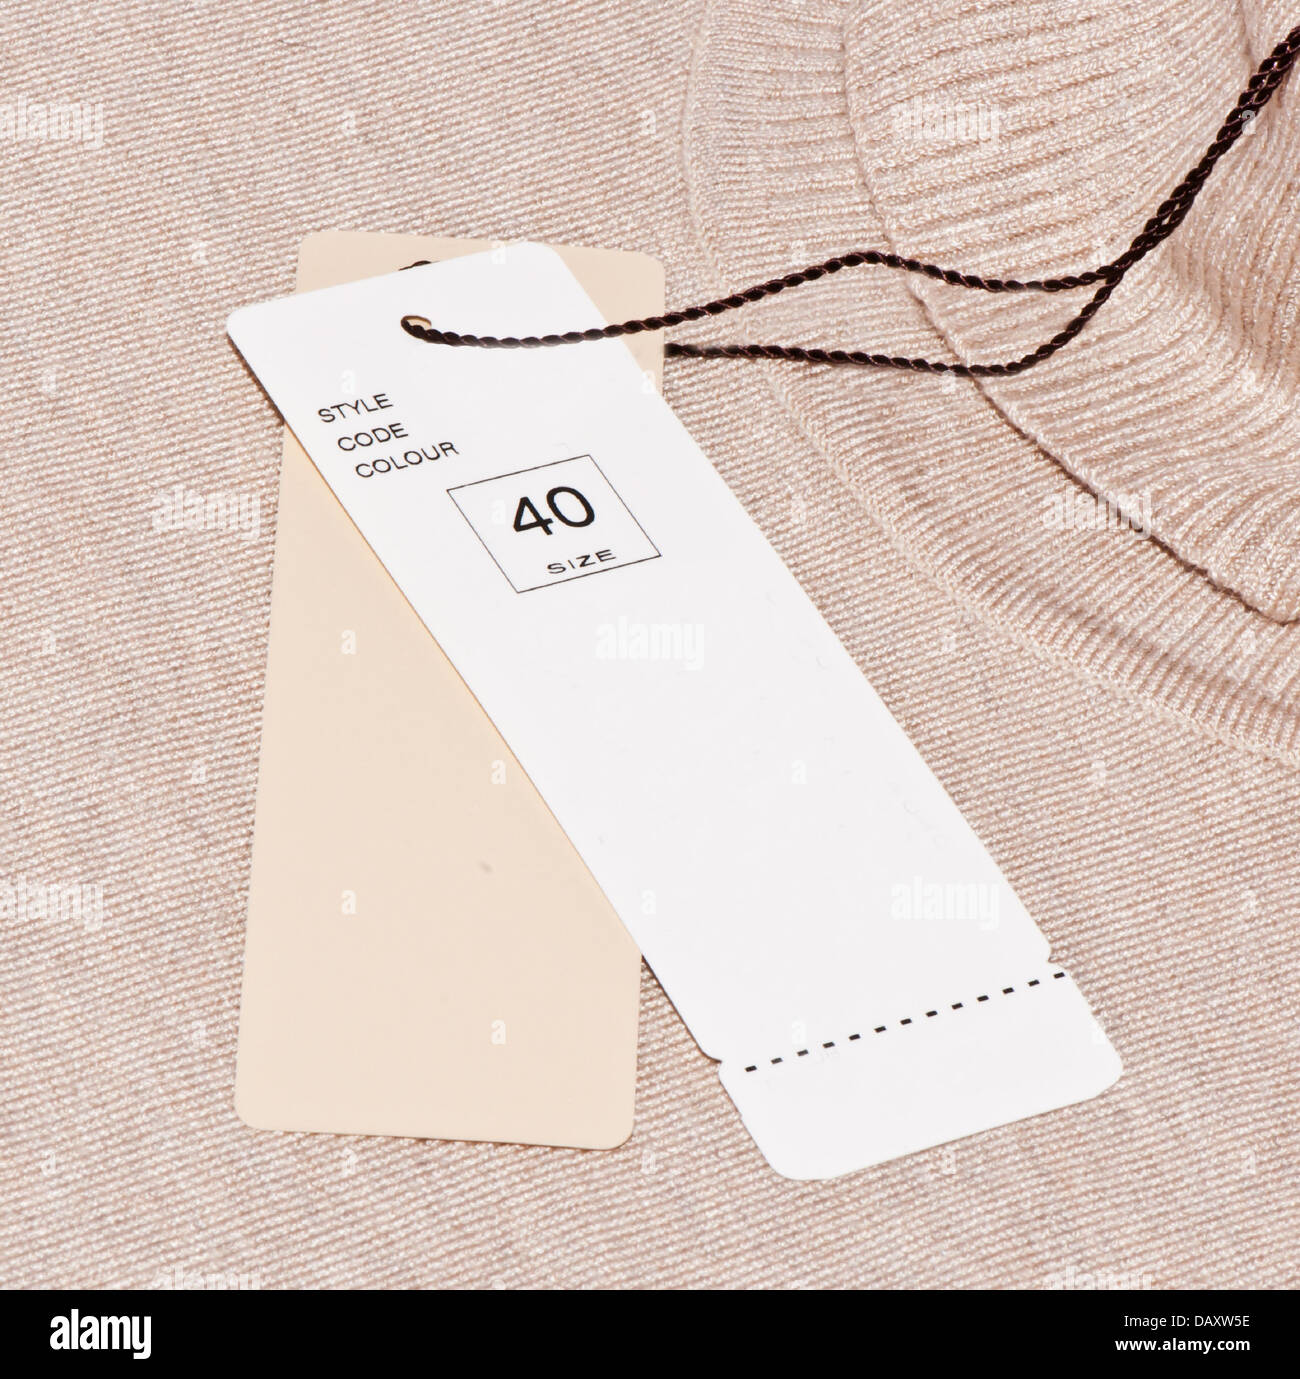 Label, Sweater, Price, Textile, Making, Nobody, Gift, Close-up, Retail, Material, Shape, Concepts, Heat, Writing, Stock Photo